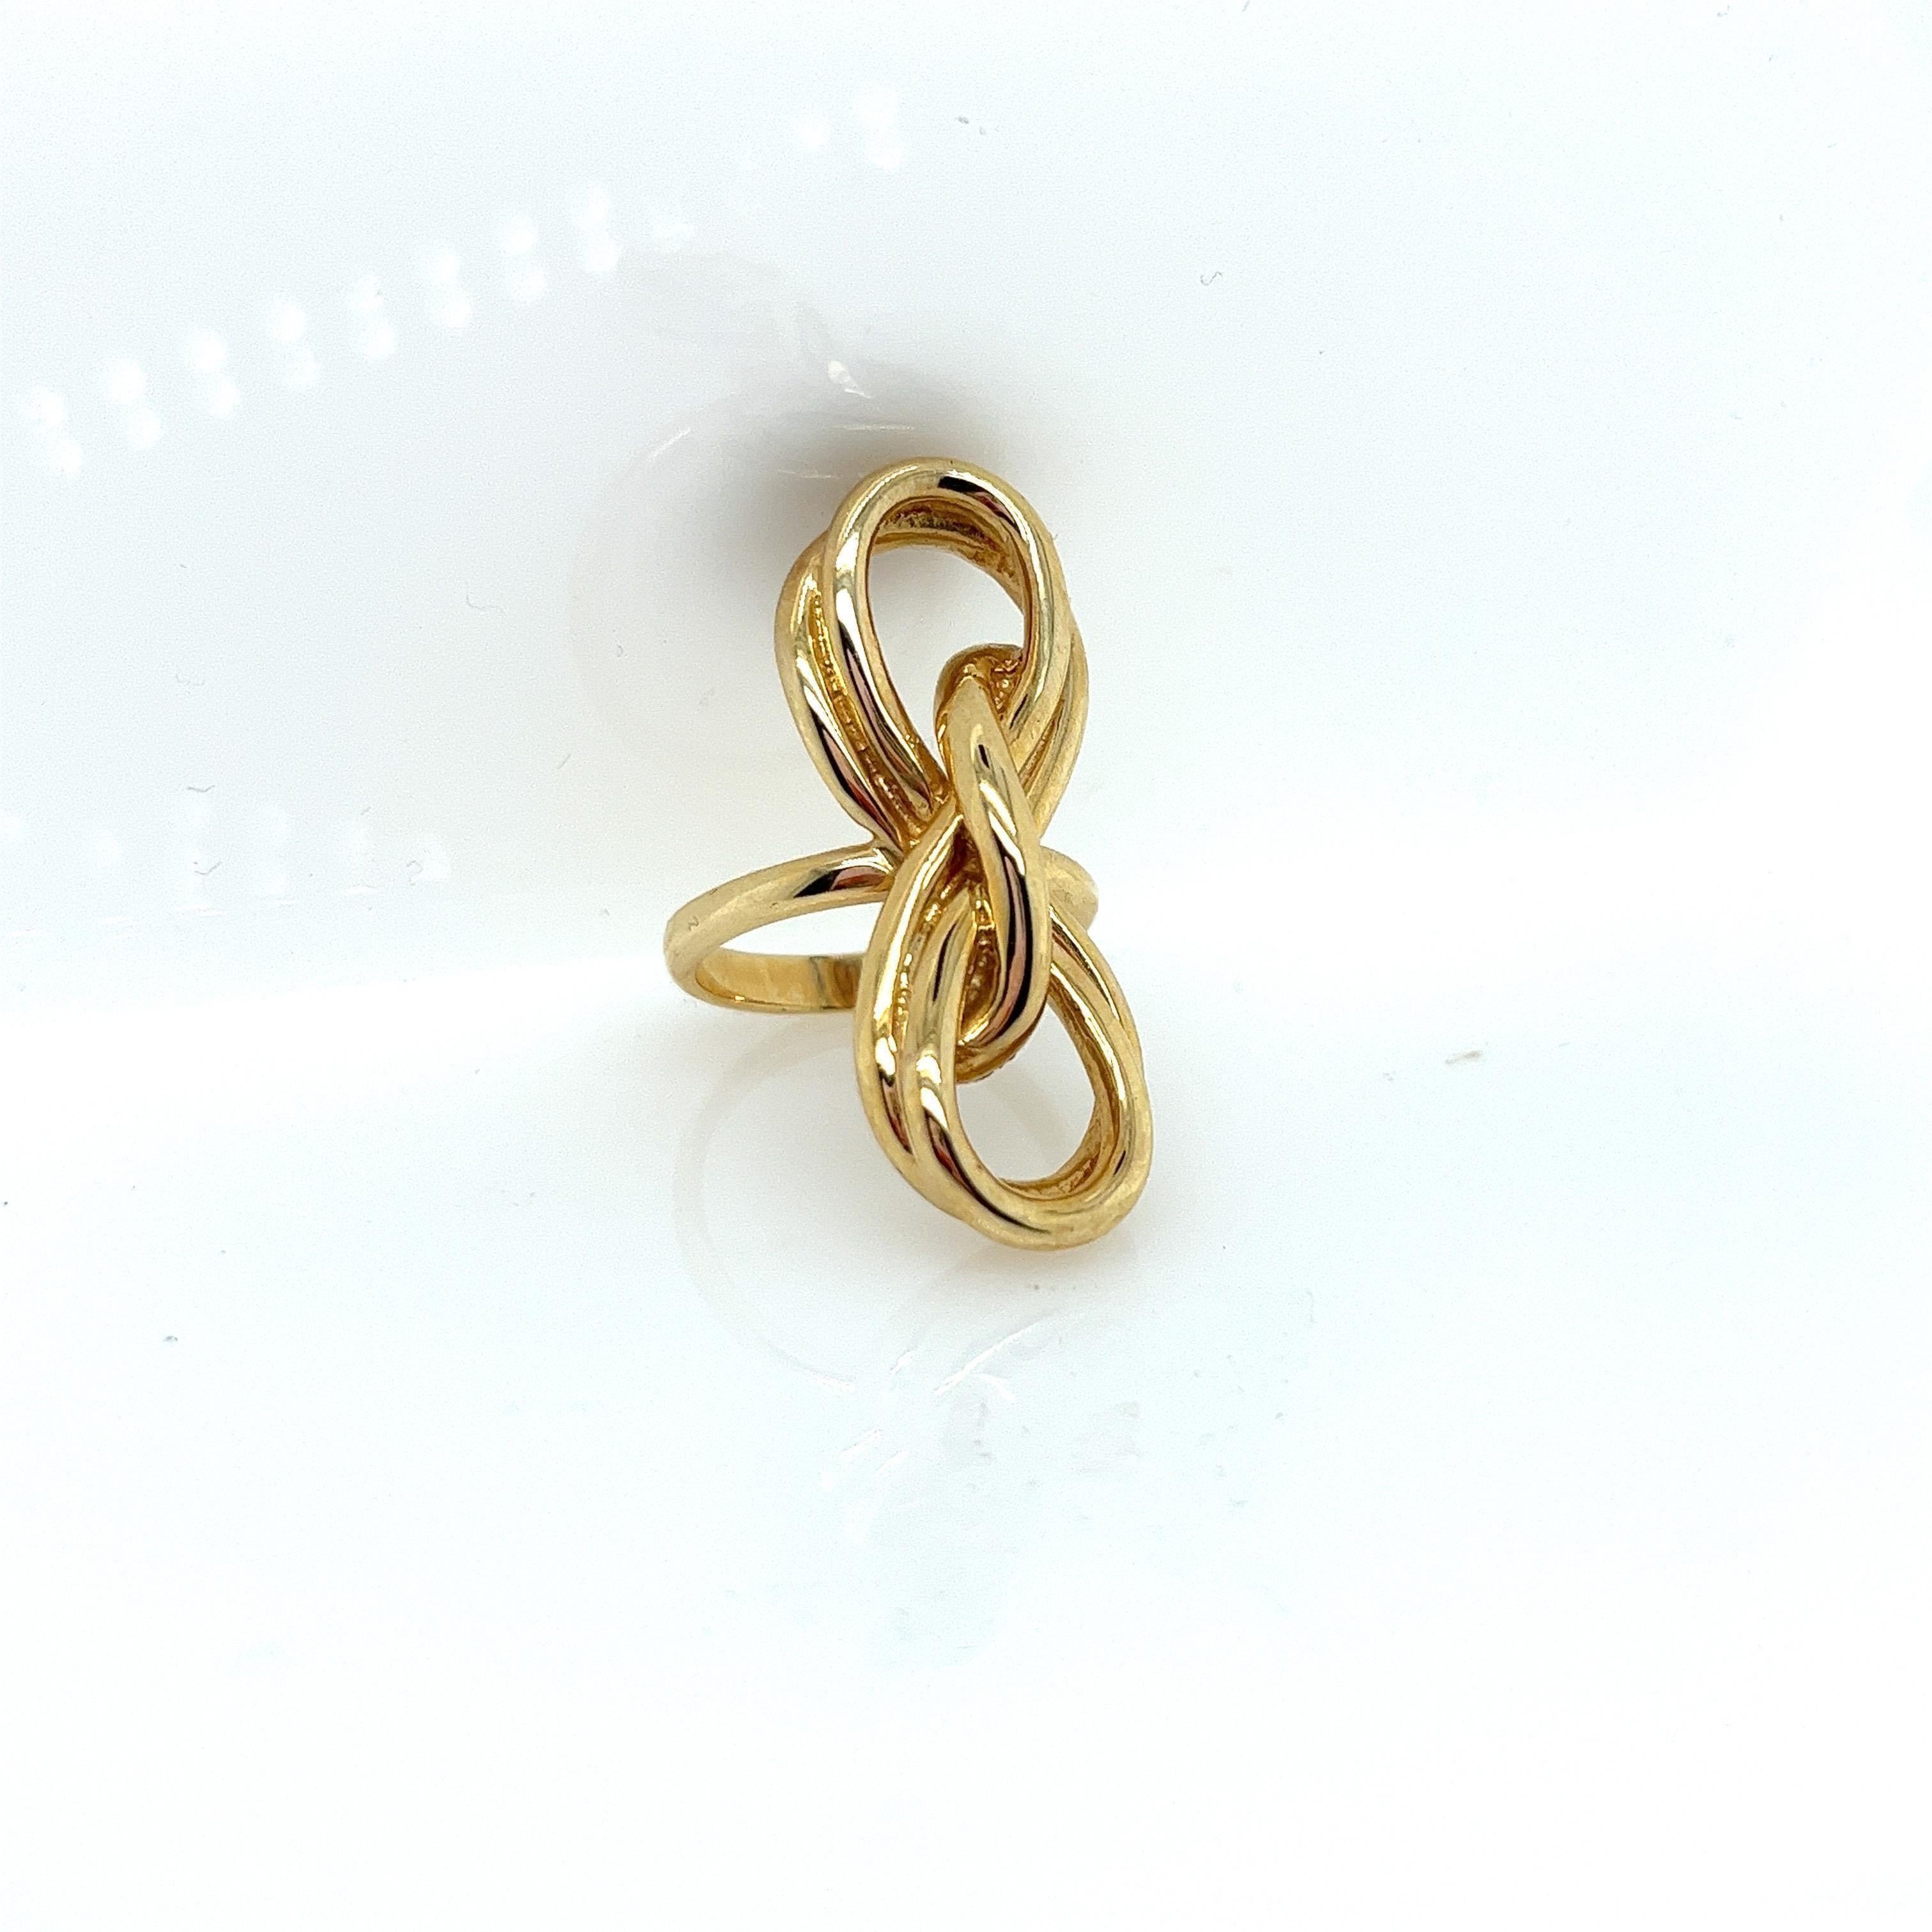 Vintage 1980's 14k Yellow Gold Ribbon Statement Ring In Excellent Condition For Sale In Boston, MA